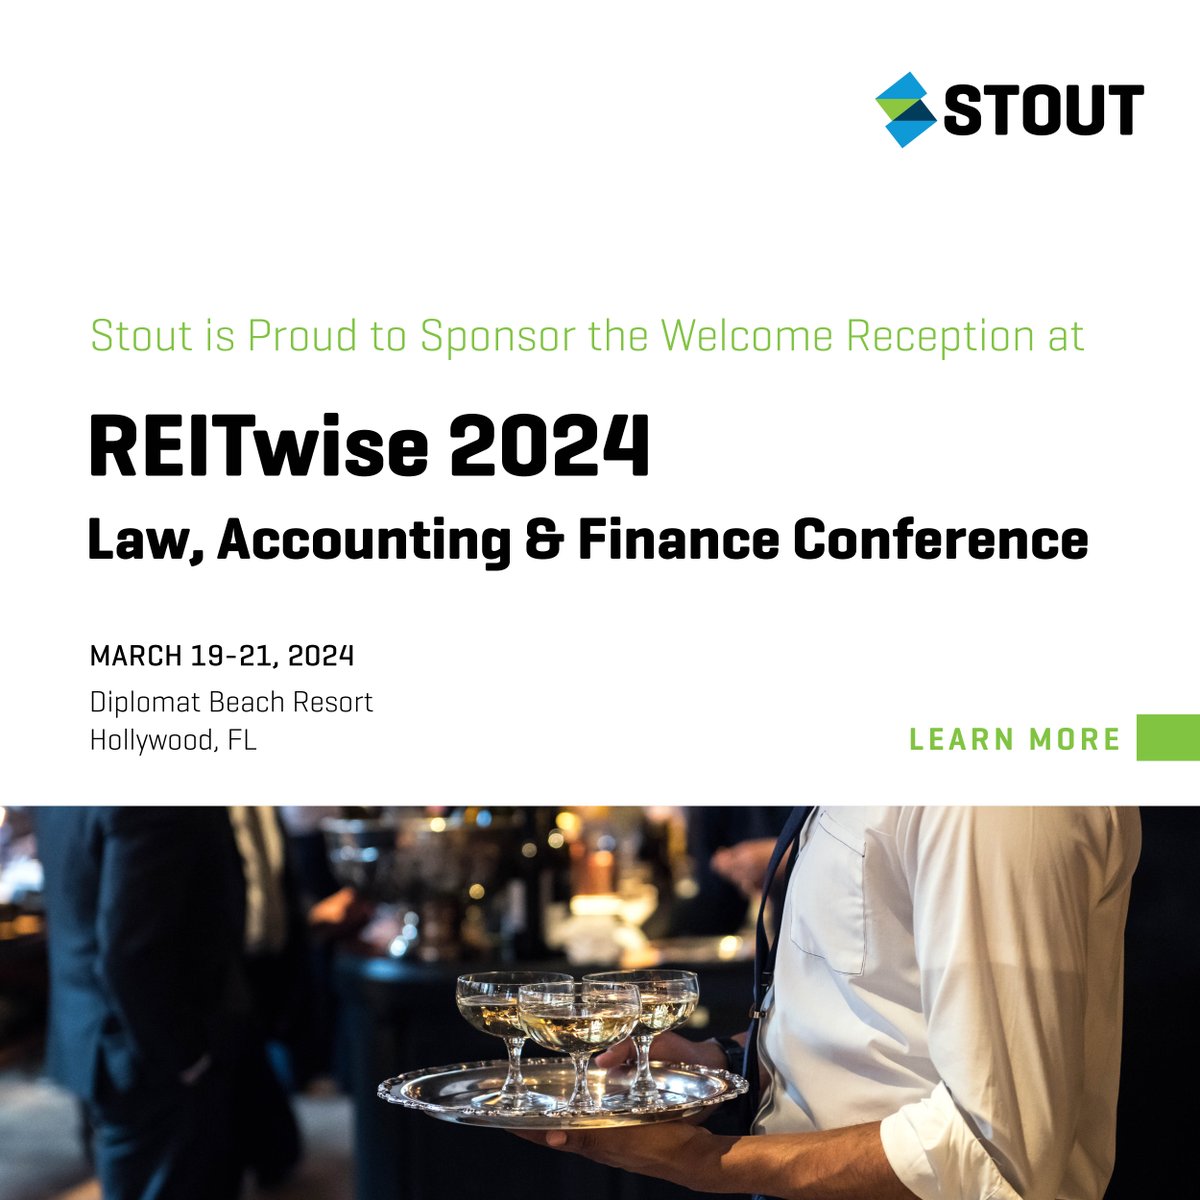 Stout is proud to sponsor the welcome reception at the distinguished REITwise 2024 Conference. Join us for an evening of networking and insights, learn more here: bit.ly/48NwQL9